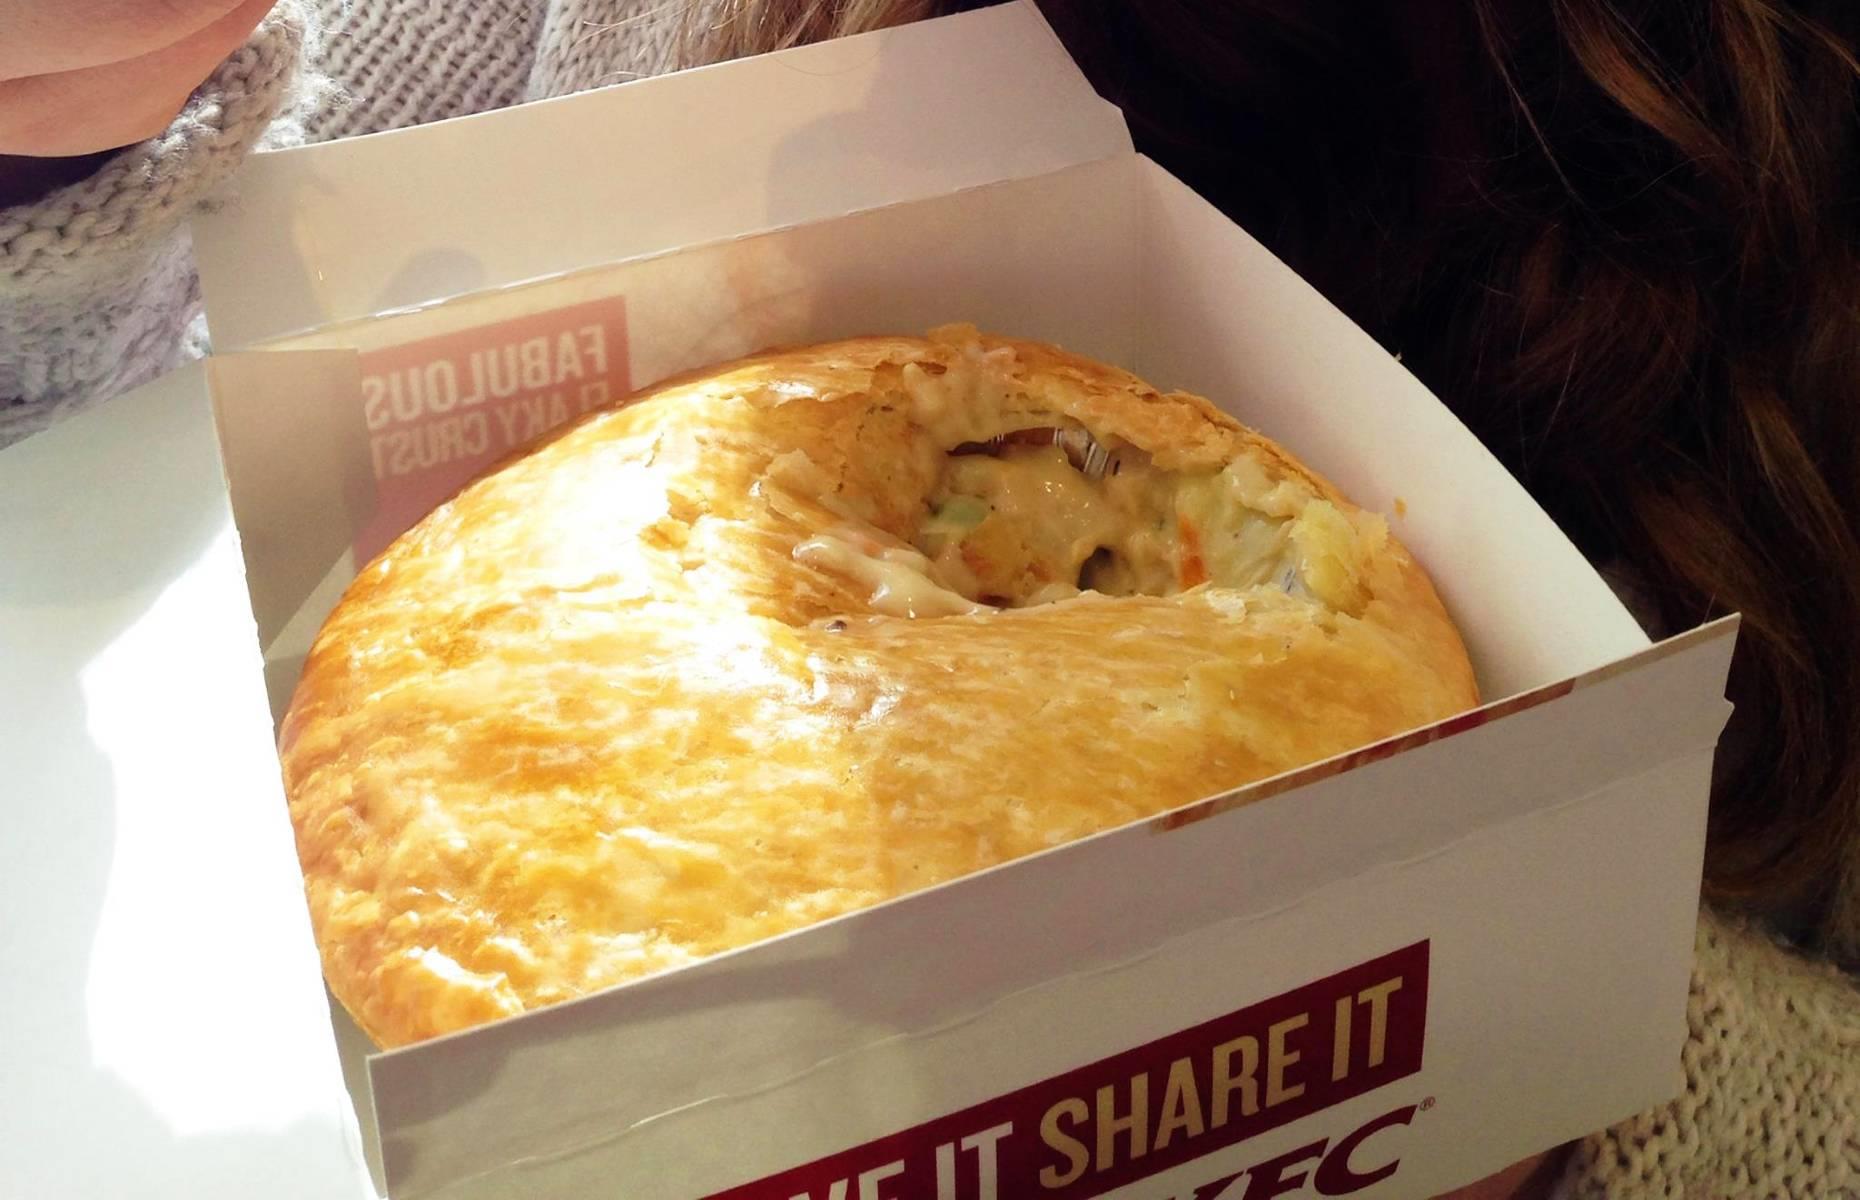 <p>The flaky-crusted Pot Pie, with its warm and creamy chicken, potato, pea and carrot filling, is a classic on the menu at KFC in the US. Sold since the 1990s, it’s as everyday as Original Recipe fried chicken, gravy and fries. In other countries, such as Japan, the savory pie has made appearances on a short-term basis along with dessert pies such as the purple Sweet Potato Pie.</p>